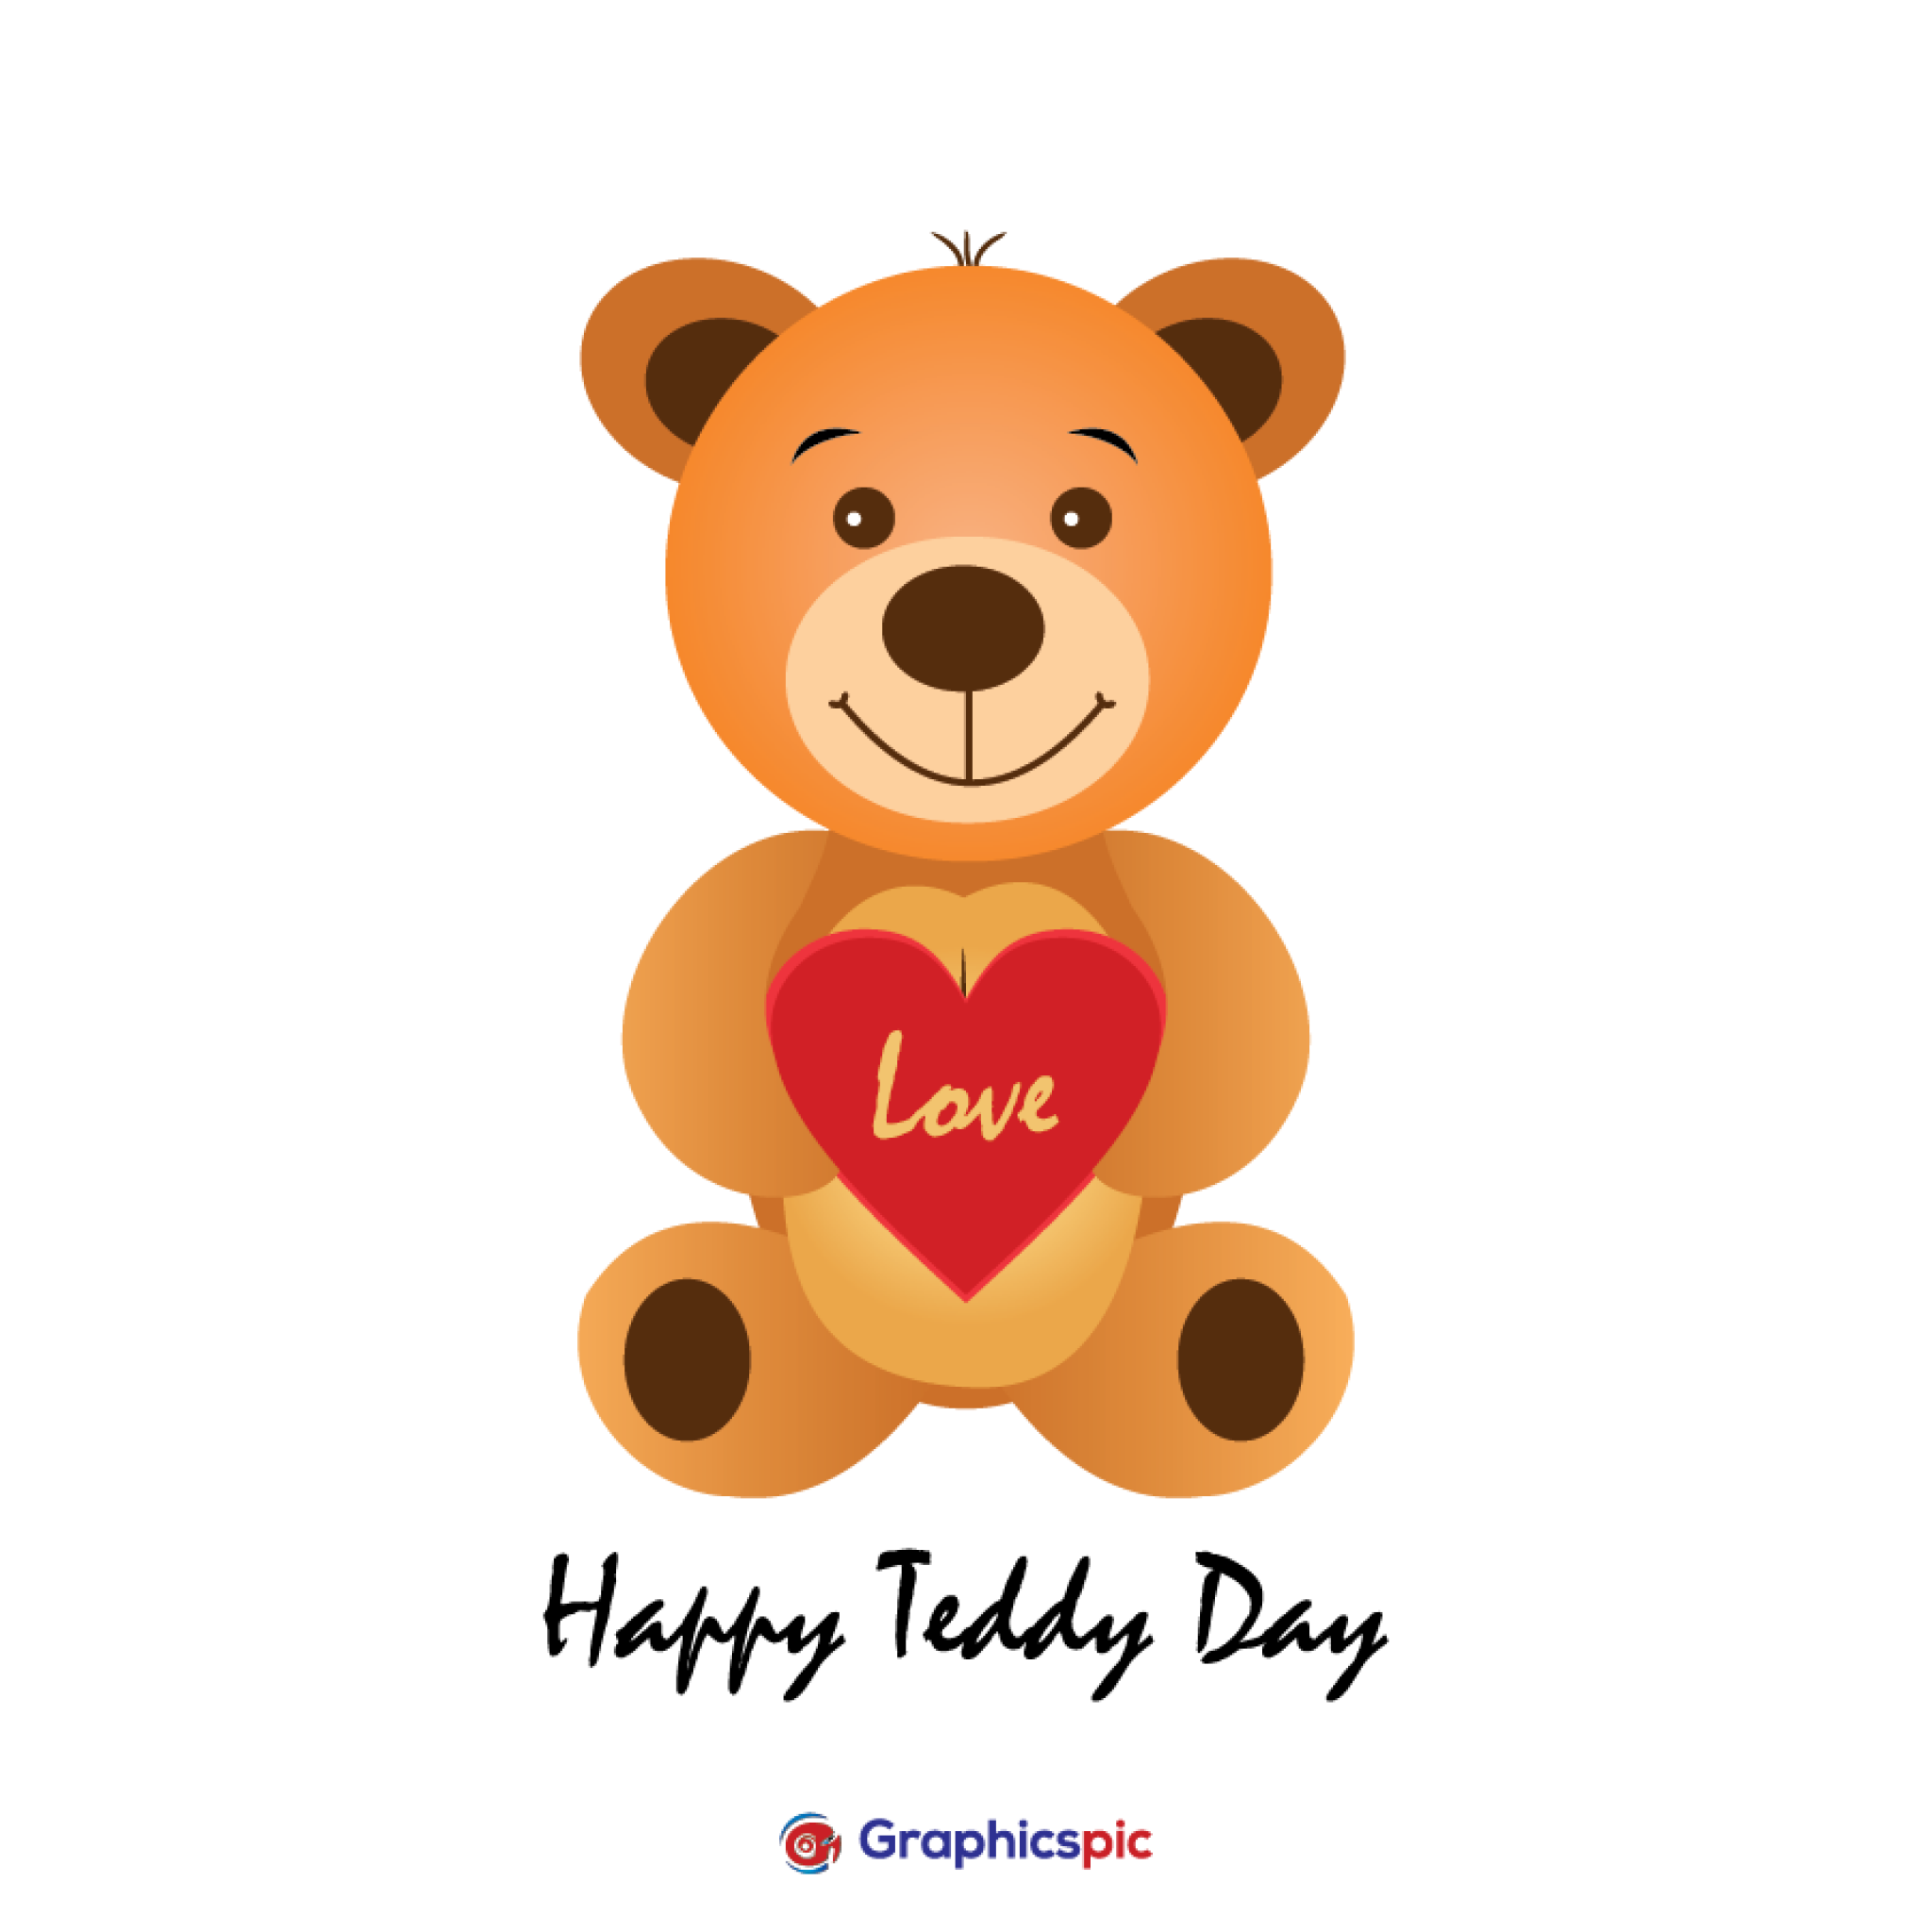 Happy teddy Day Creative poster Design Greetings Card illustration pic